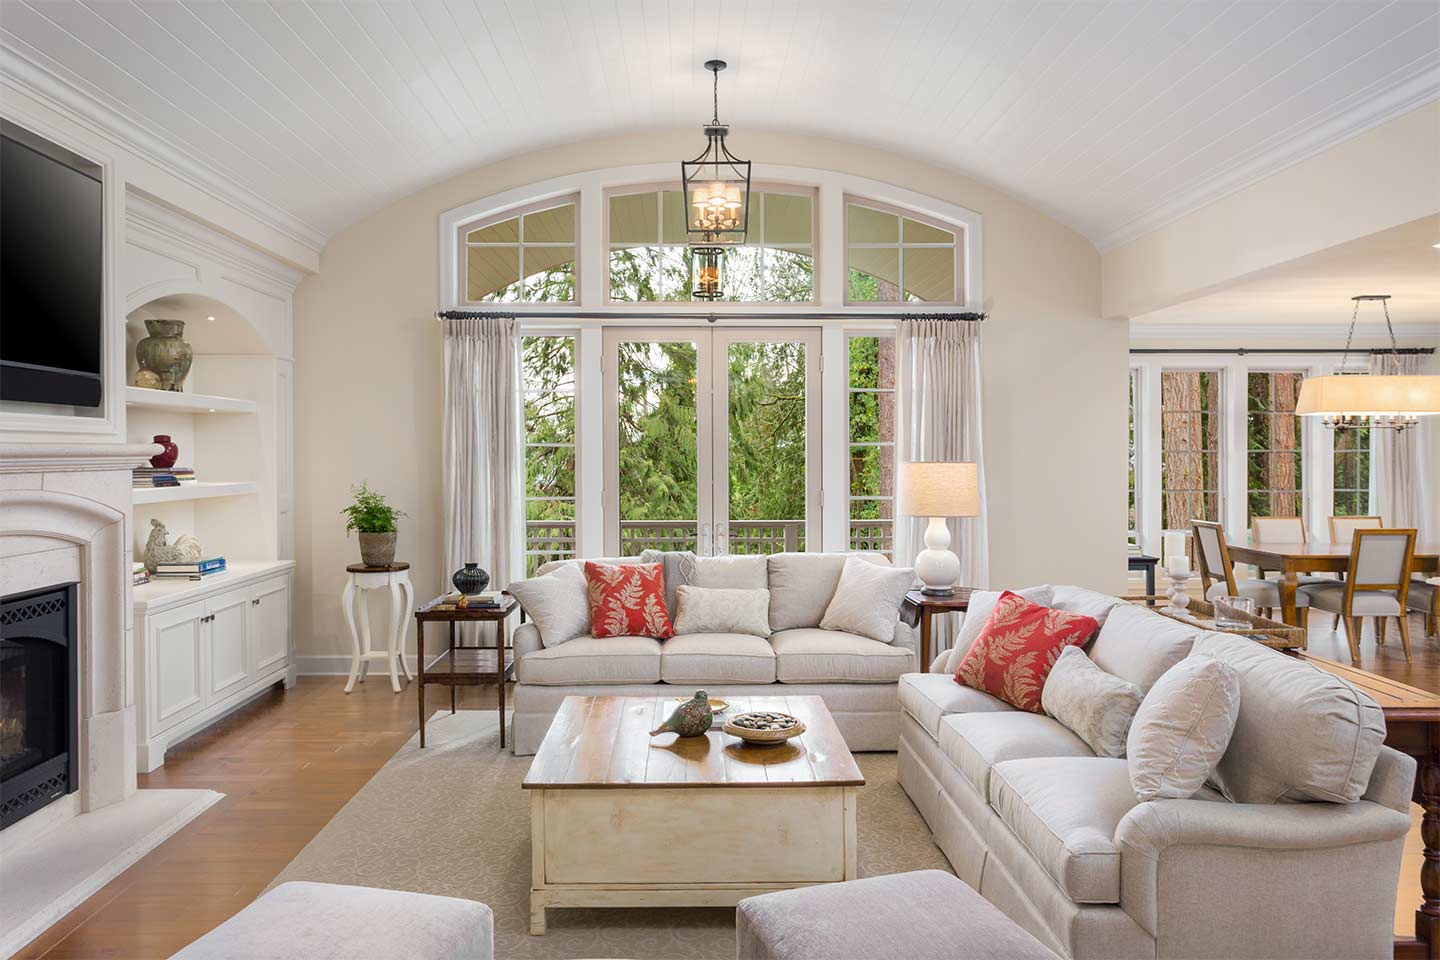 gorgeous French door flanked by two sidelites and an arched transom providing an expansive view to a beautiful garden